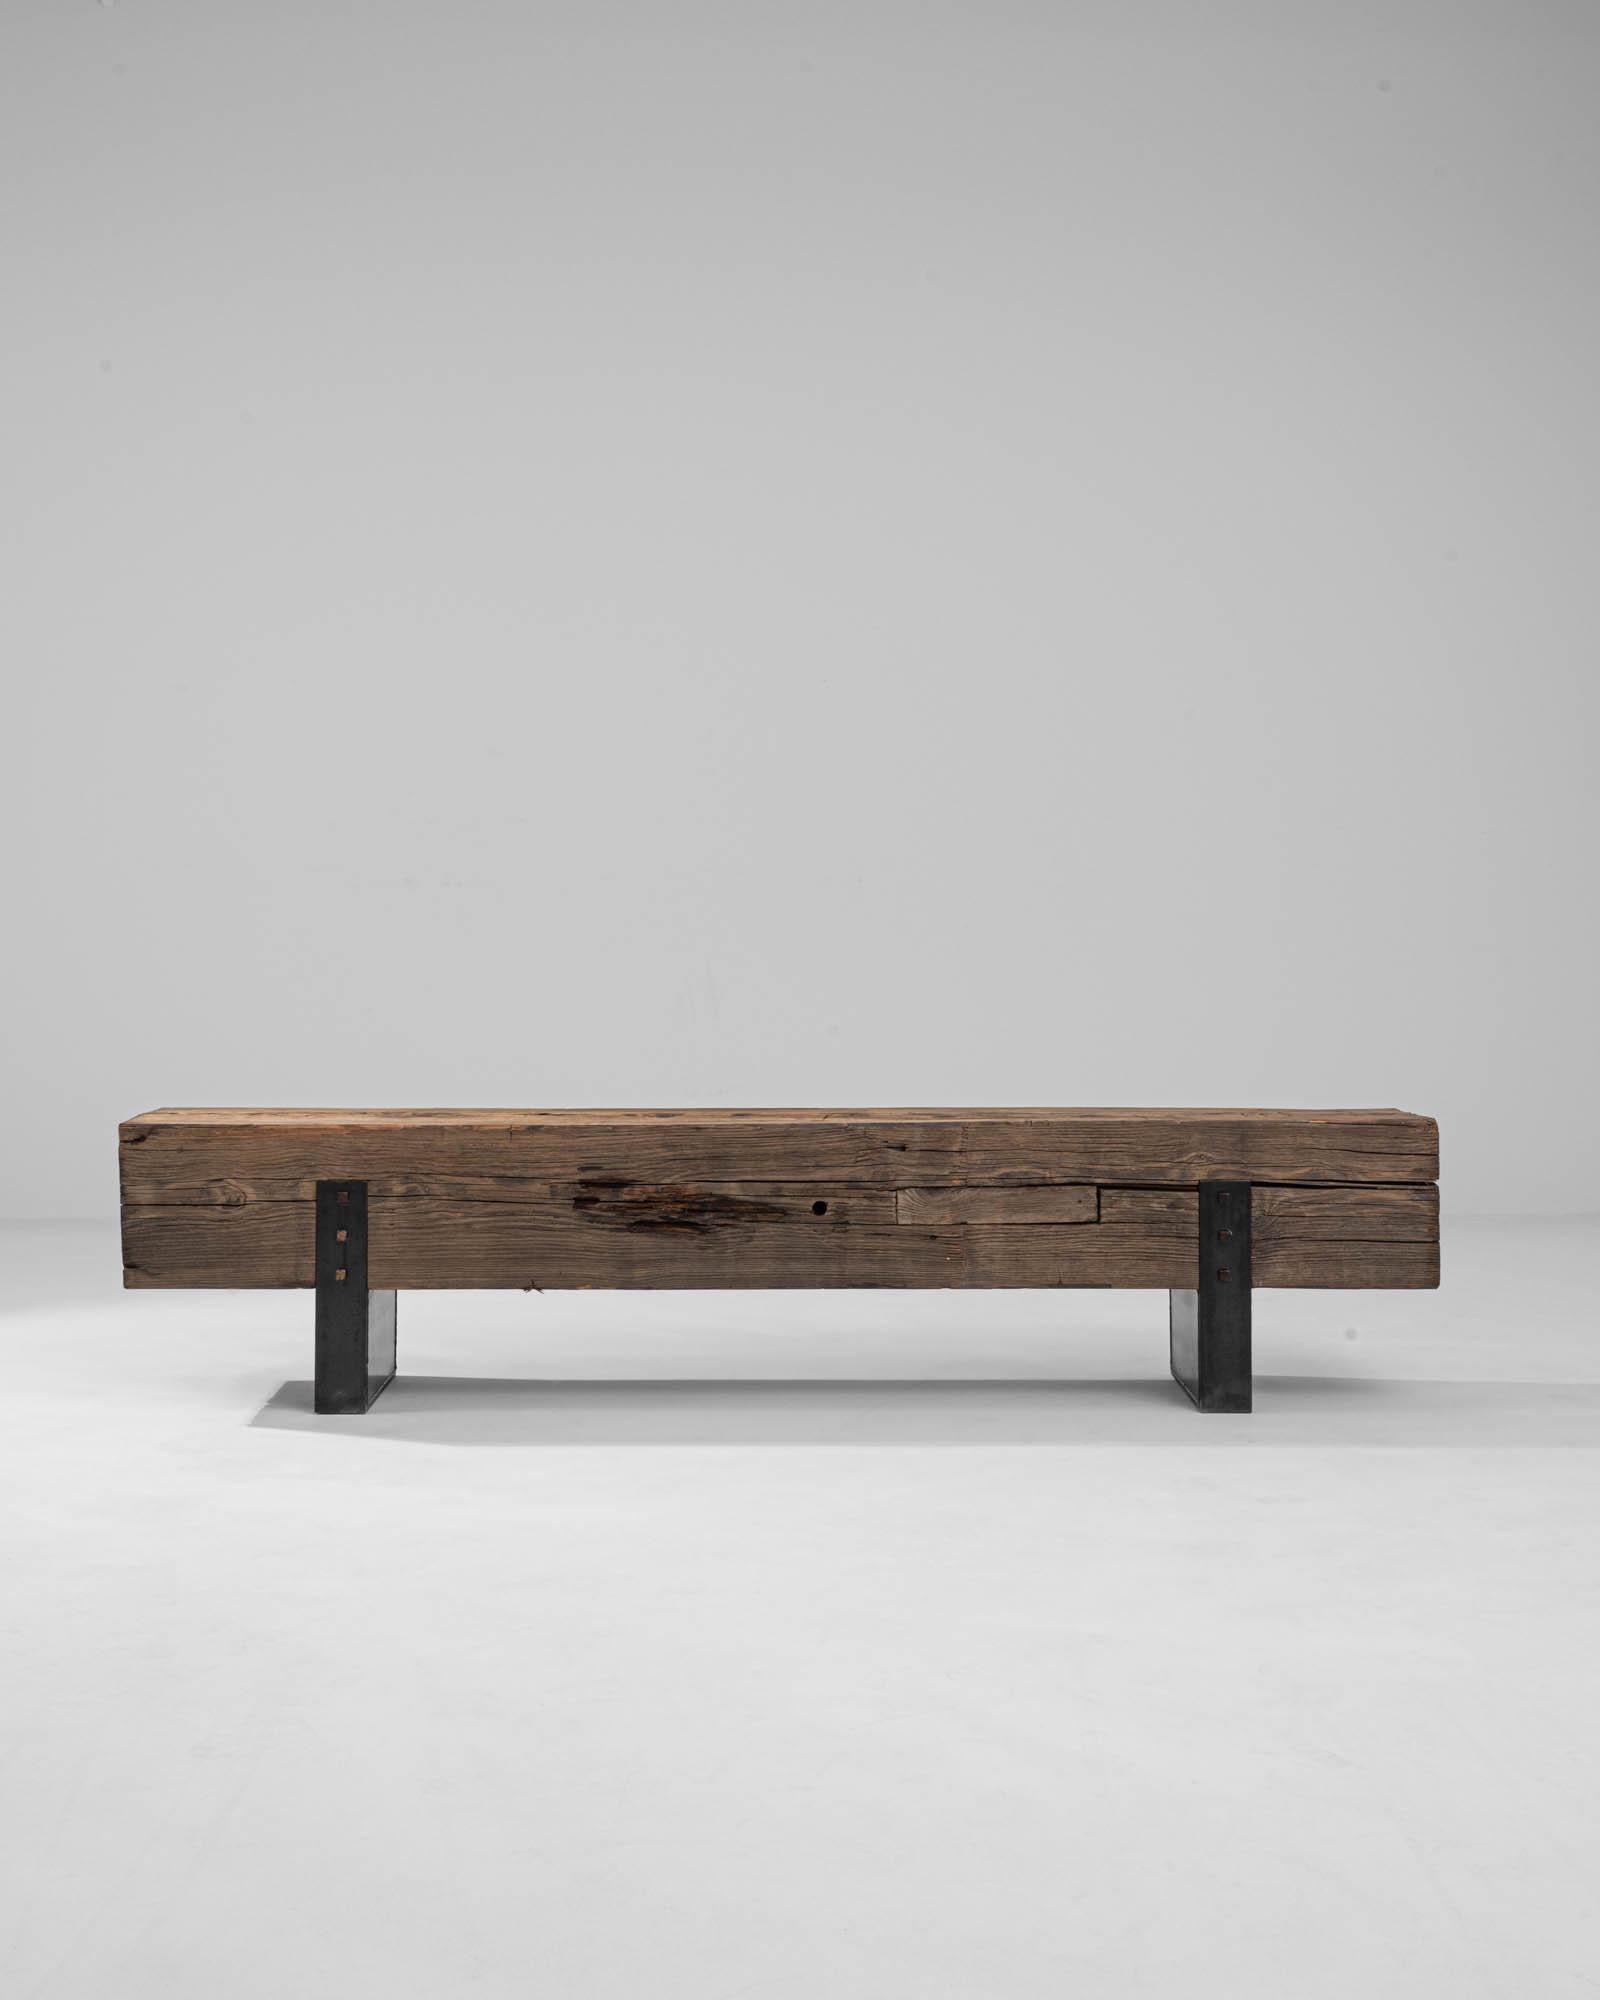 An antique Central European wooden timber has been adapted into this unique bench in our atelier. Steel rectangular feet slot precisely into the left and right side of the wooden bench to form artfully crafted, minimal feet. The bench seat, which it